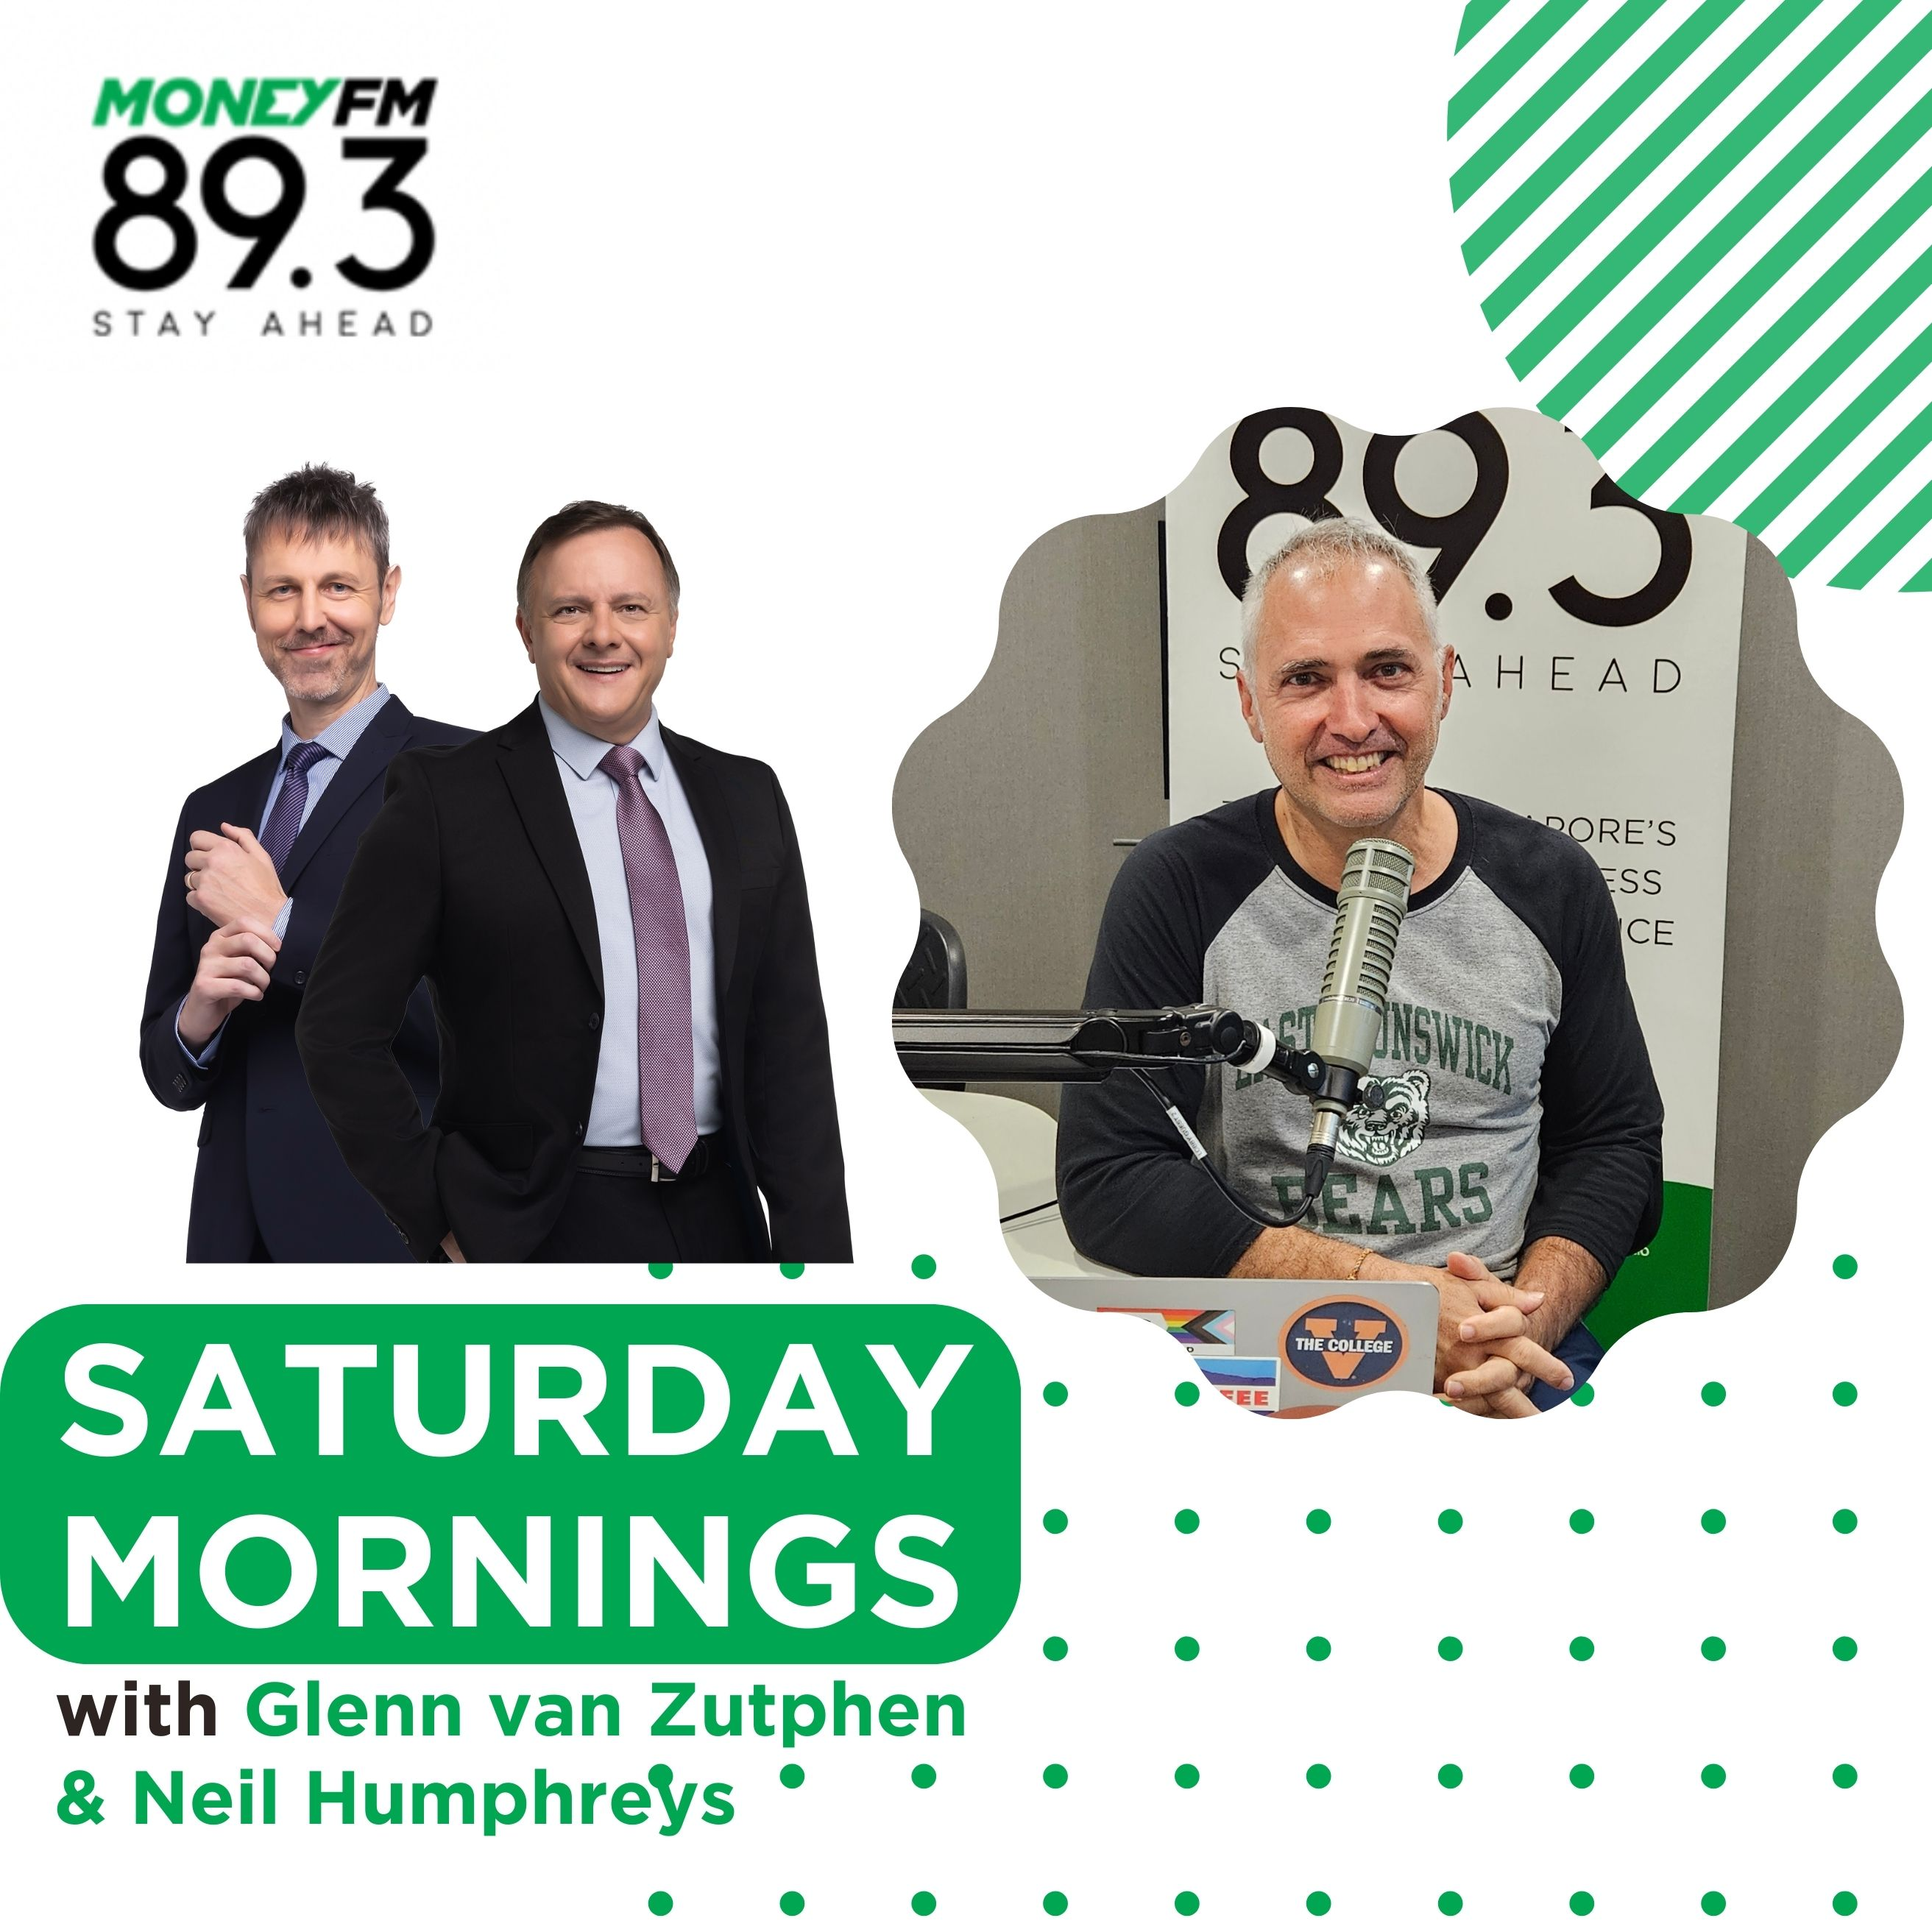 Saturday Mornings: International News Review with Steve Okun on the JAL air crash, Israel's post Gaza war plan, Bollywood writer strike, and the faceless chocolate lawsuit